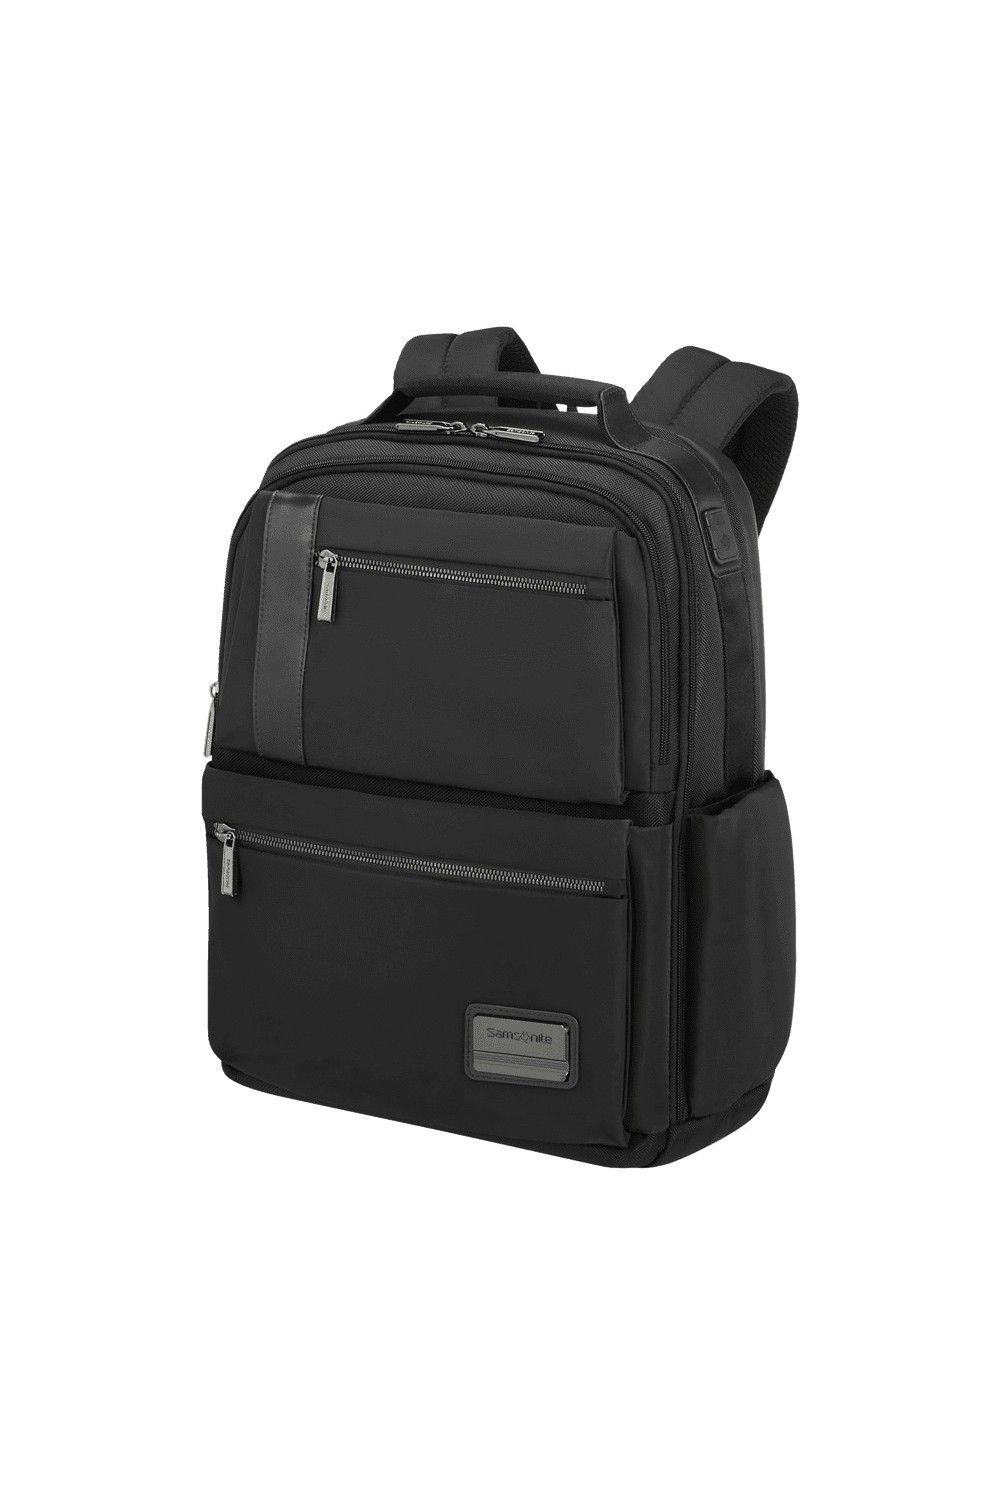 Samsonite Openroad 2.0 laptop backpack 15.6 inches